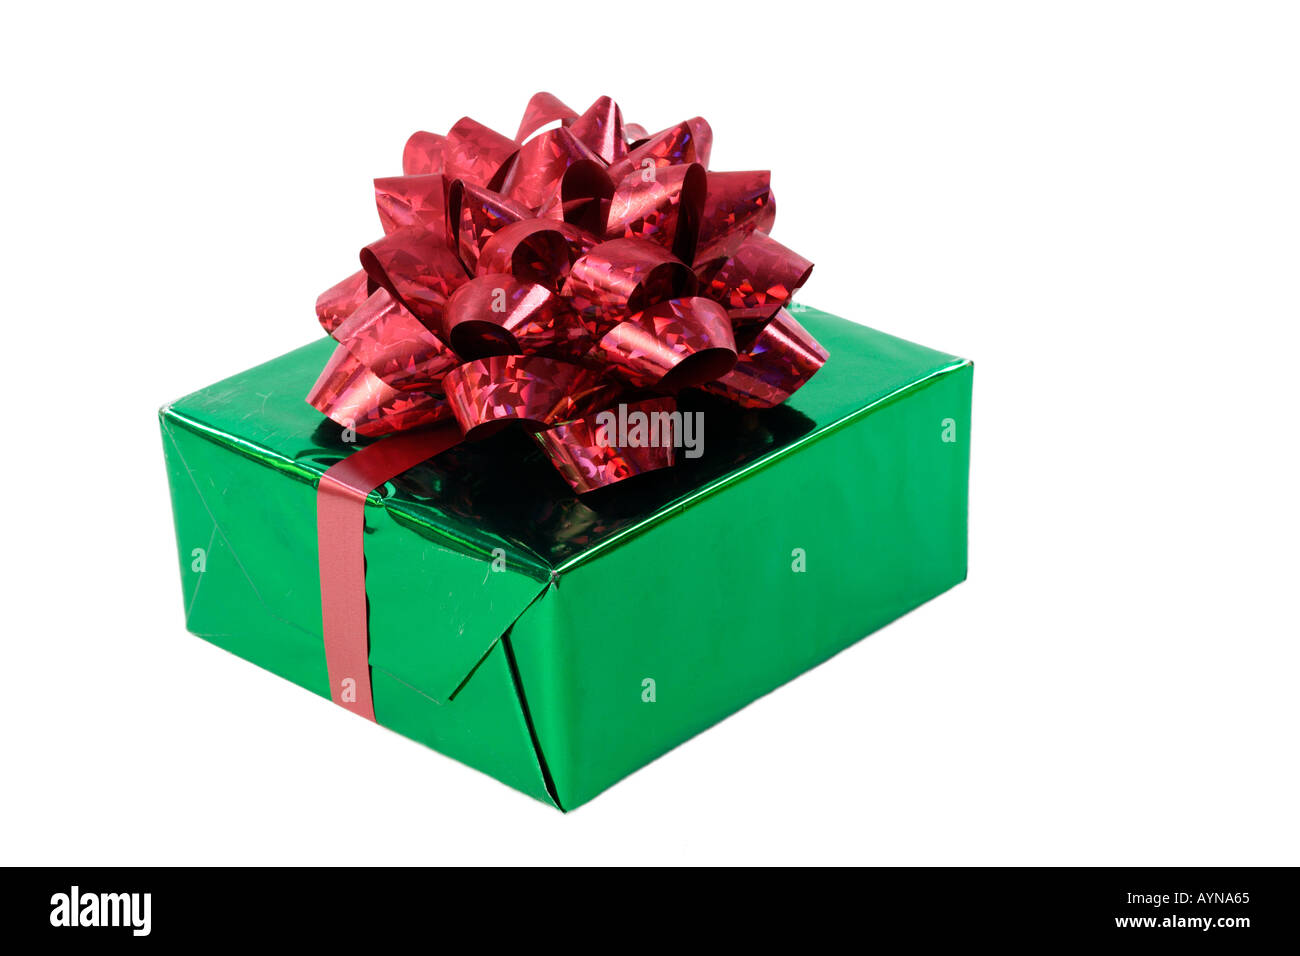 Still life of a shiny green gift wrapped present with an ornate red bow isolated on a white background Stock Photo